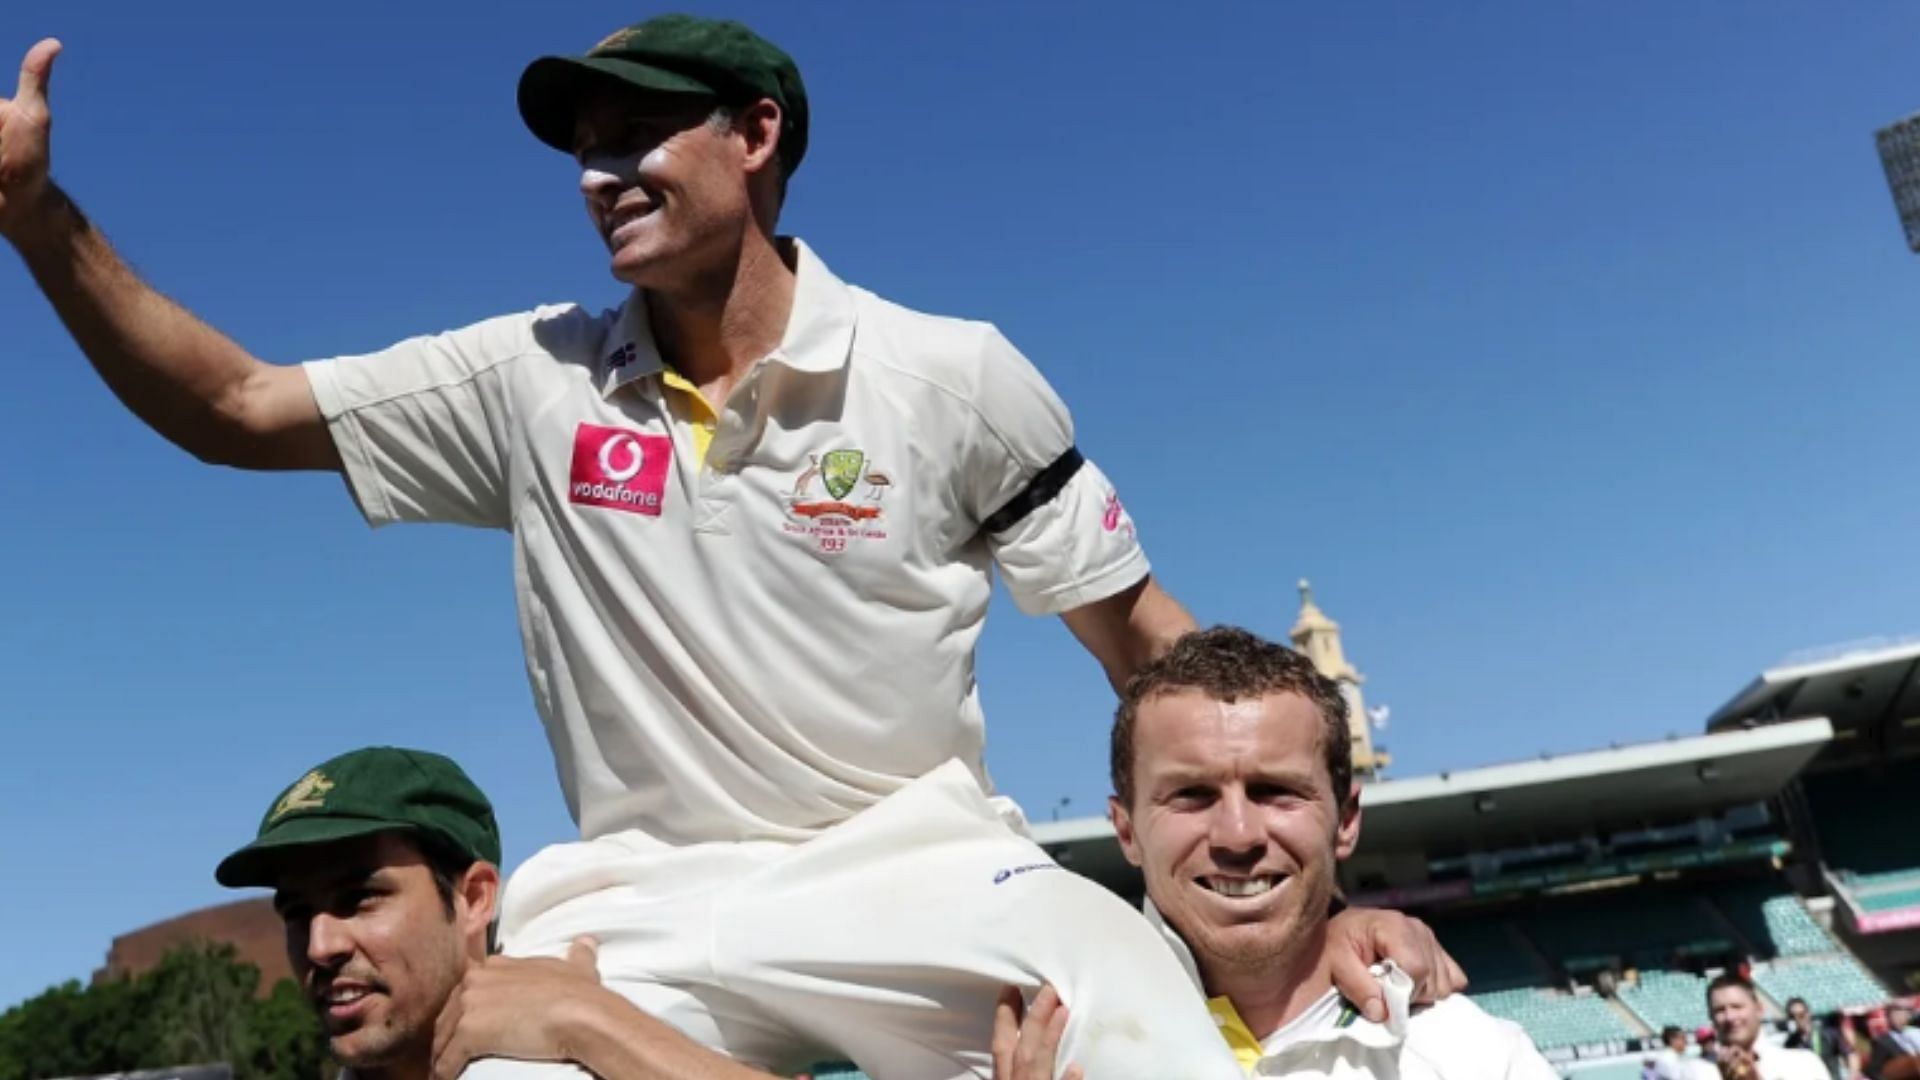 Mike Hussey was carried on the shoulders of Mitchell Johnson and Peter Siddle after his final Test. (Pic: Getty)